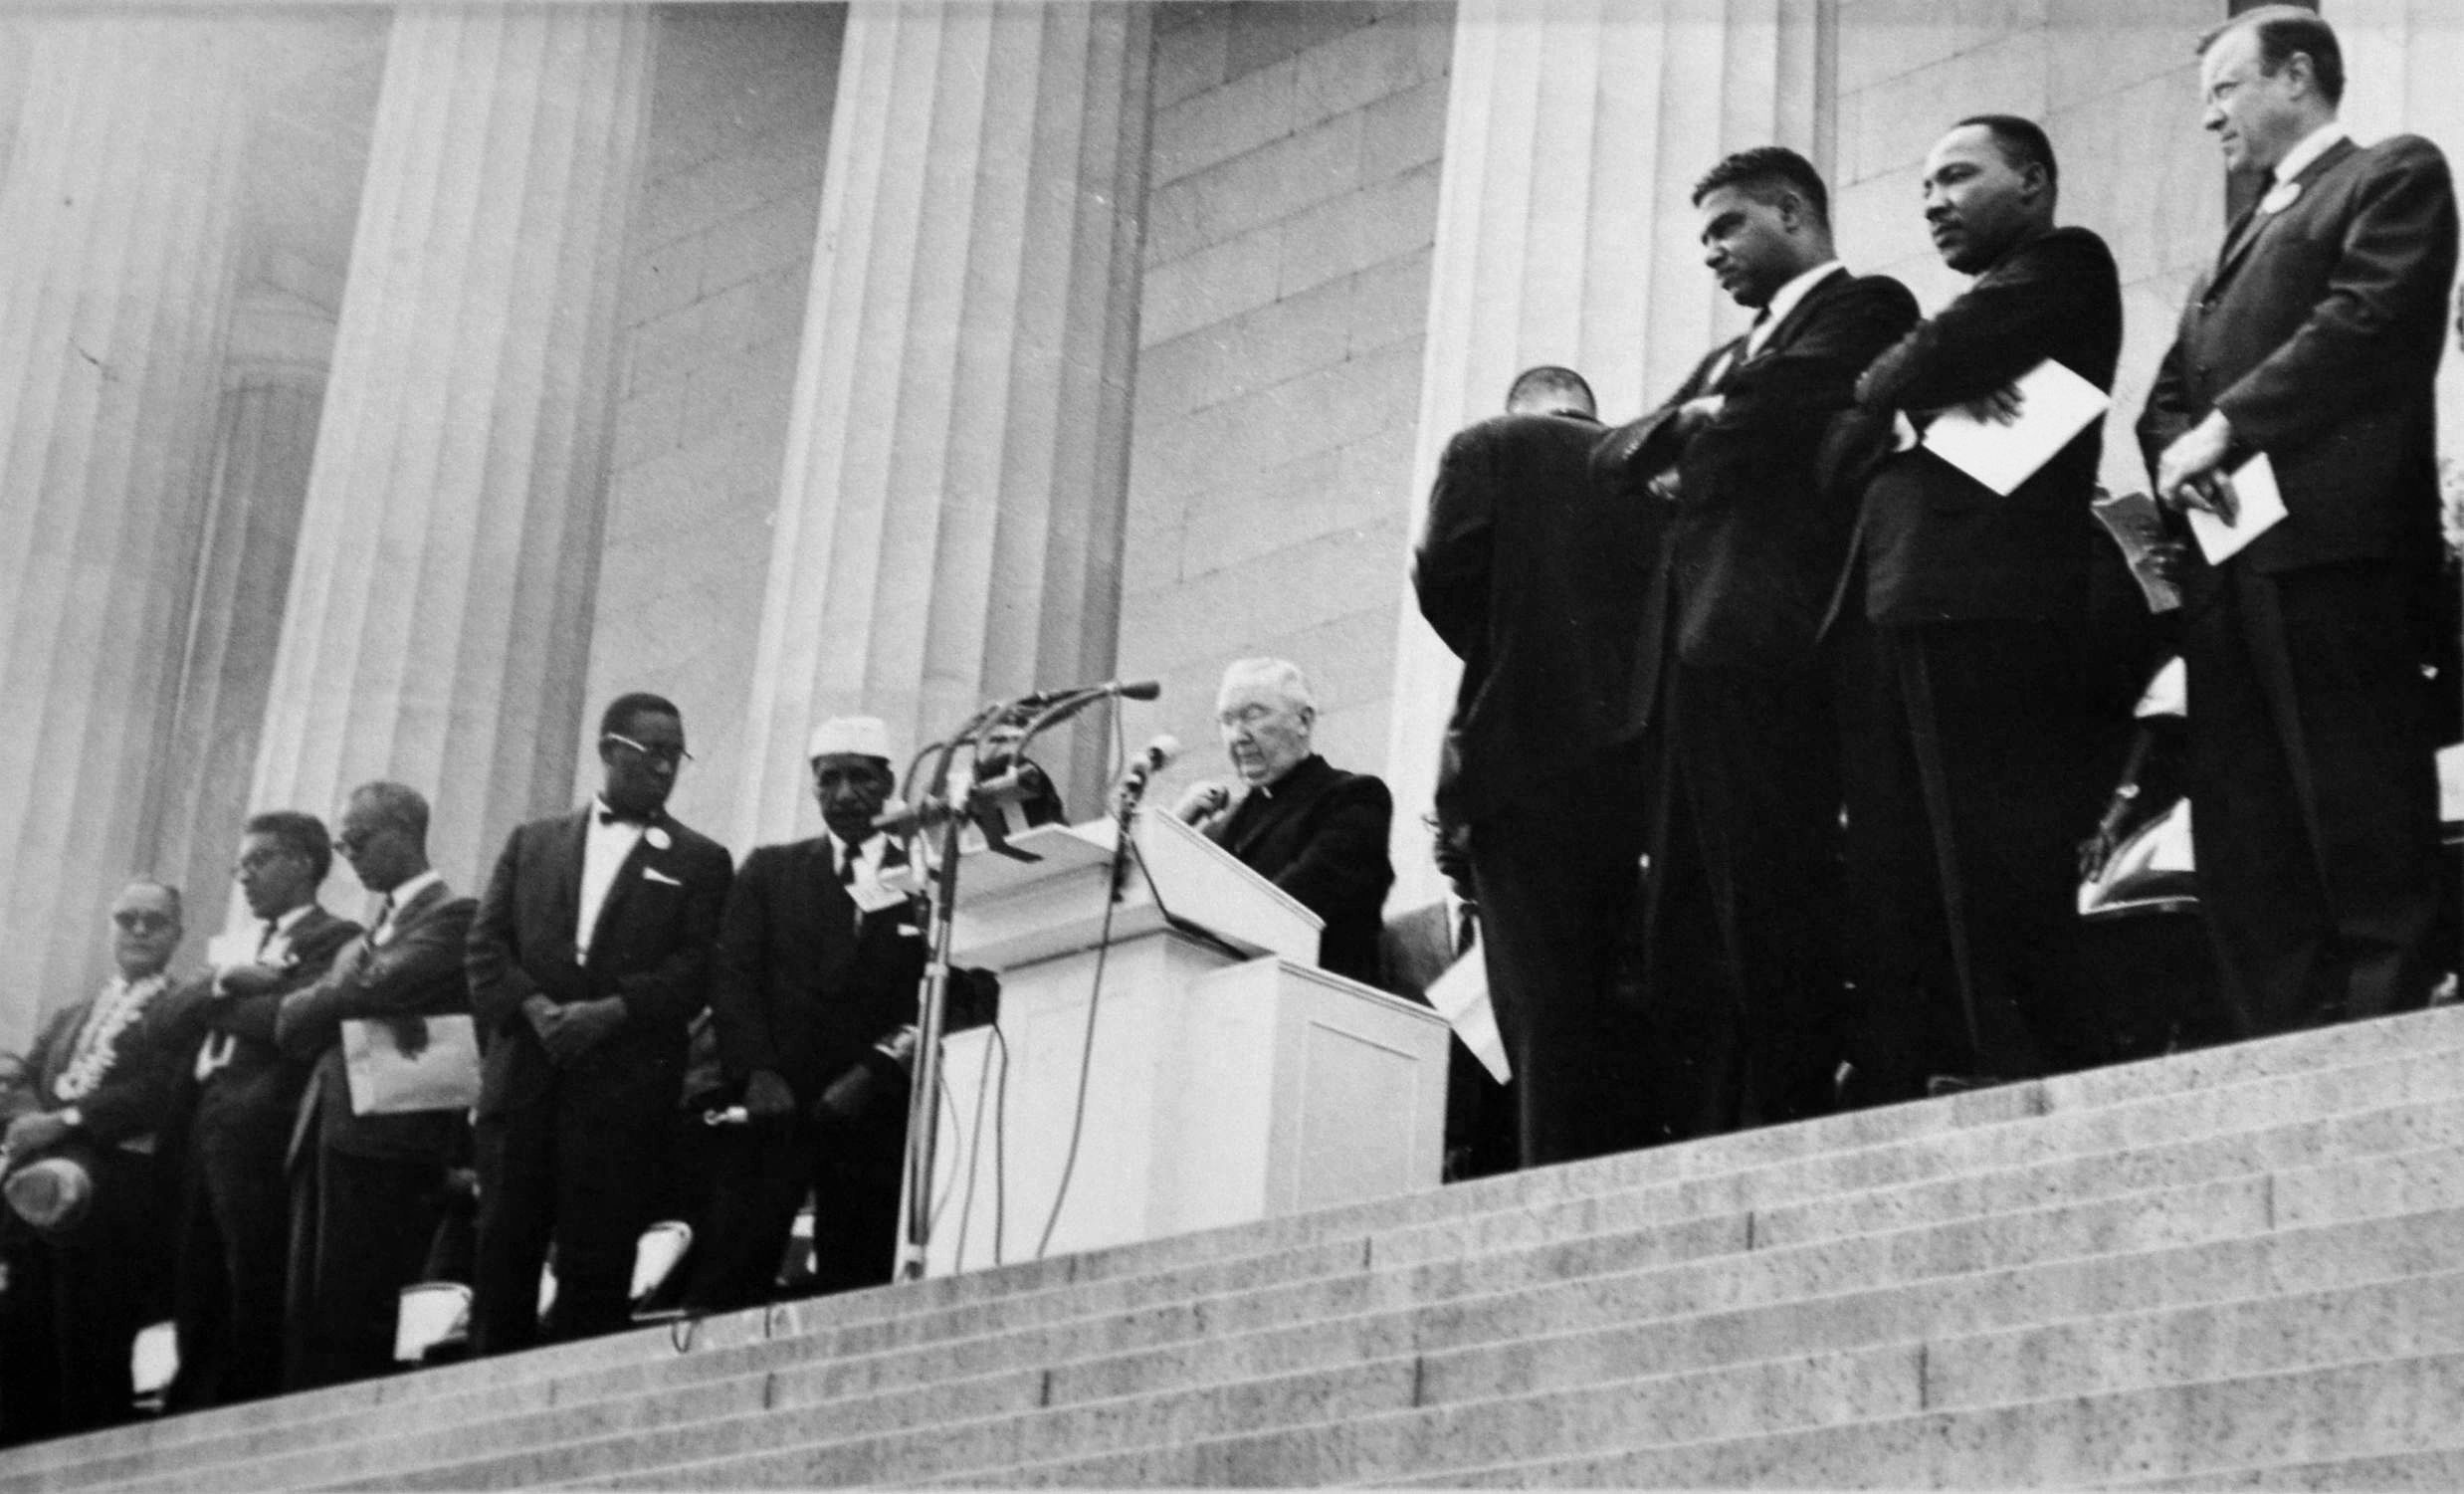 Archbishop O'Boyle gives the invocation at the 1963 March on Washington